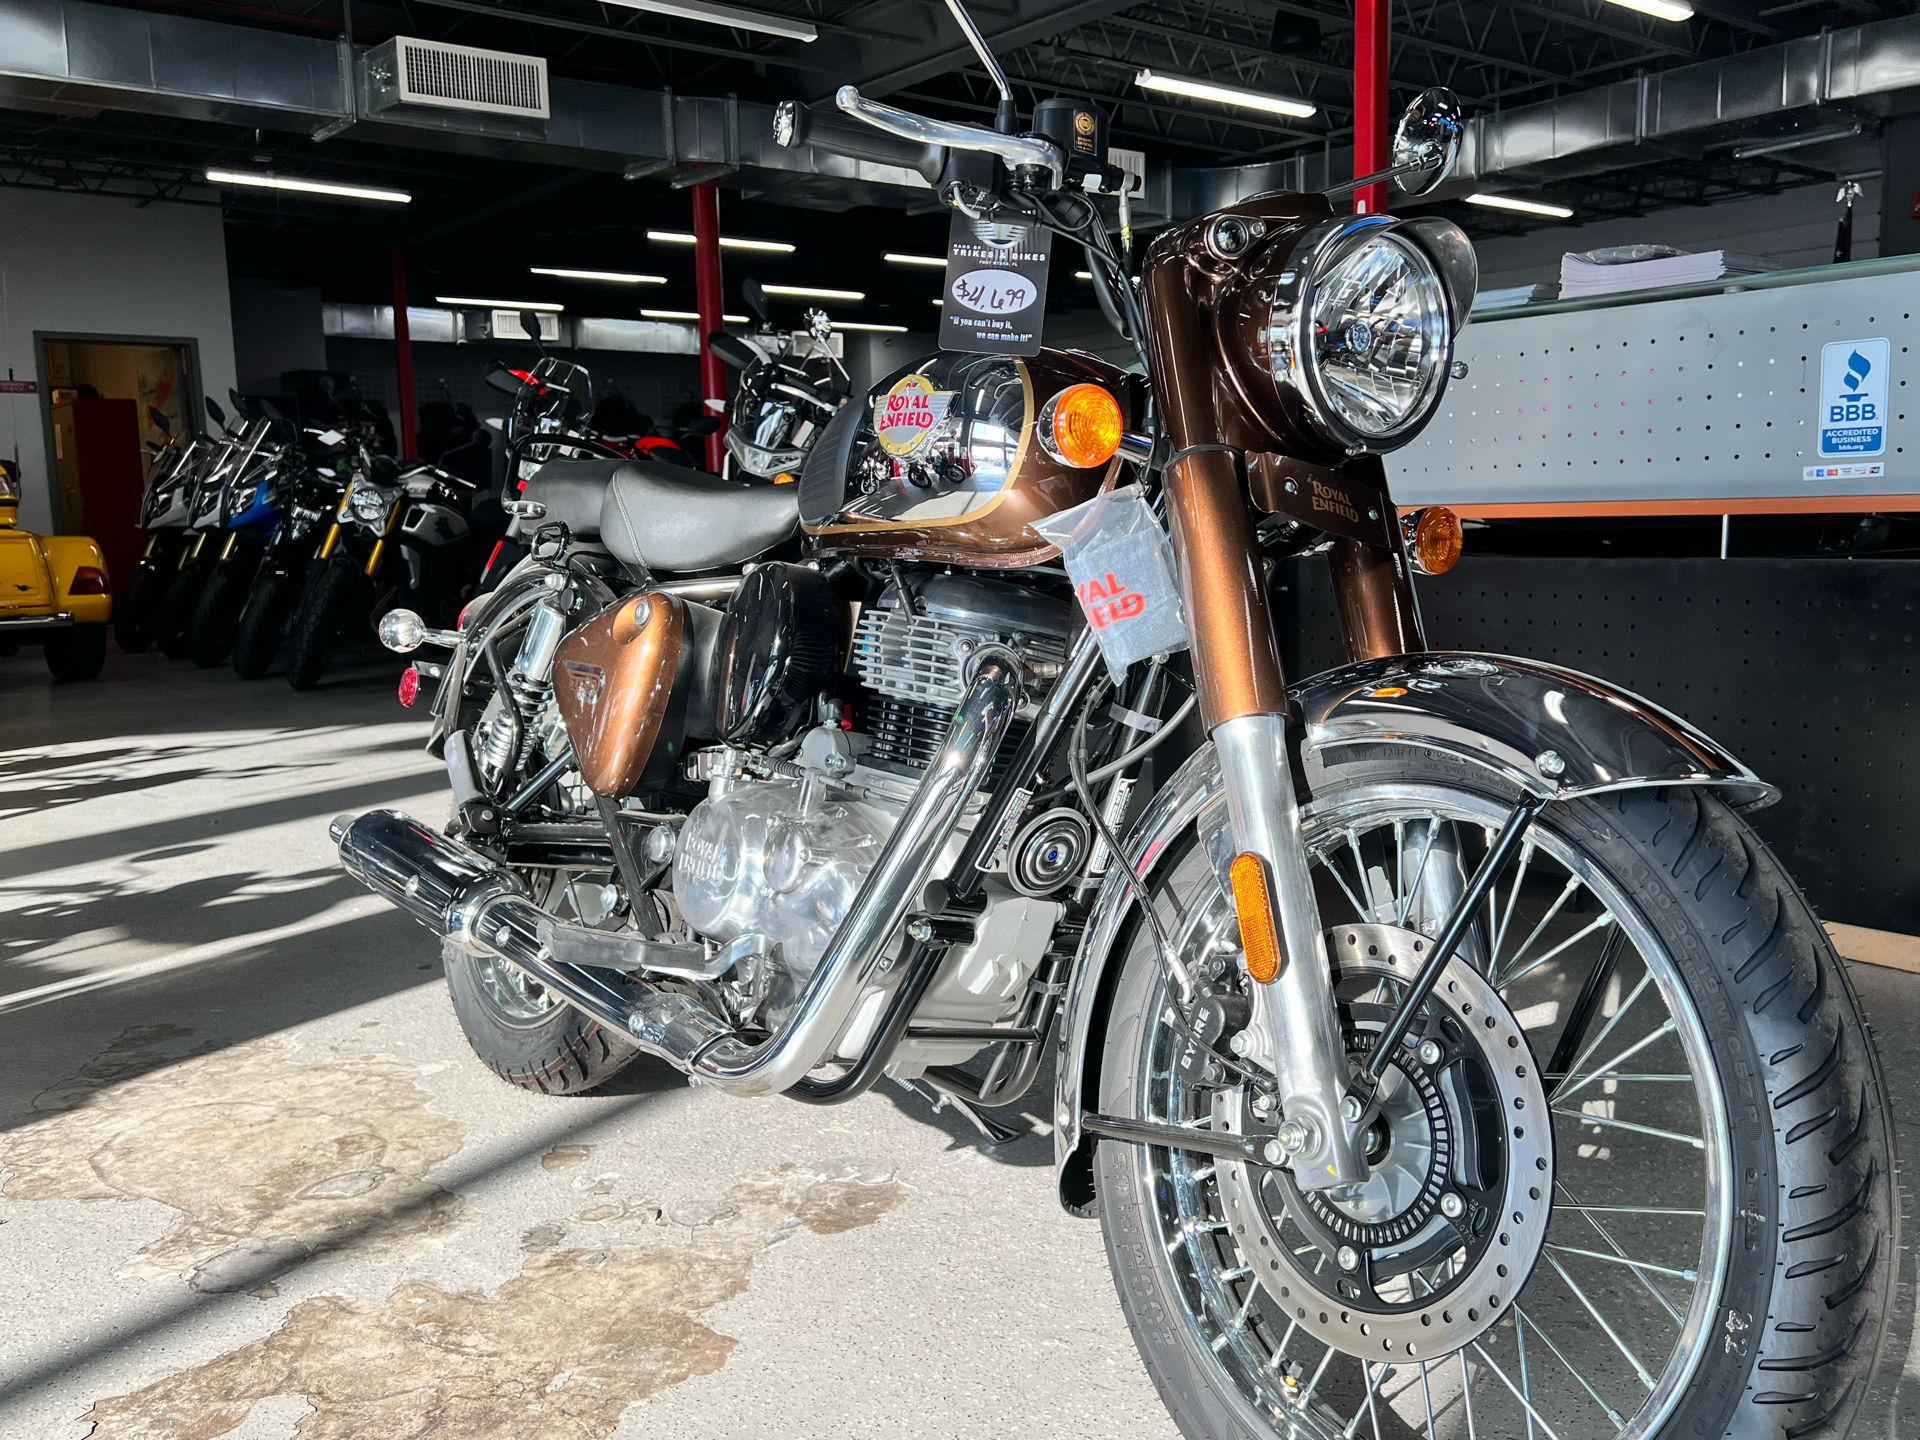 2022 Royal Enfield Classic 350 in Fort Myers, Florida - Photo 2